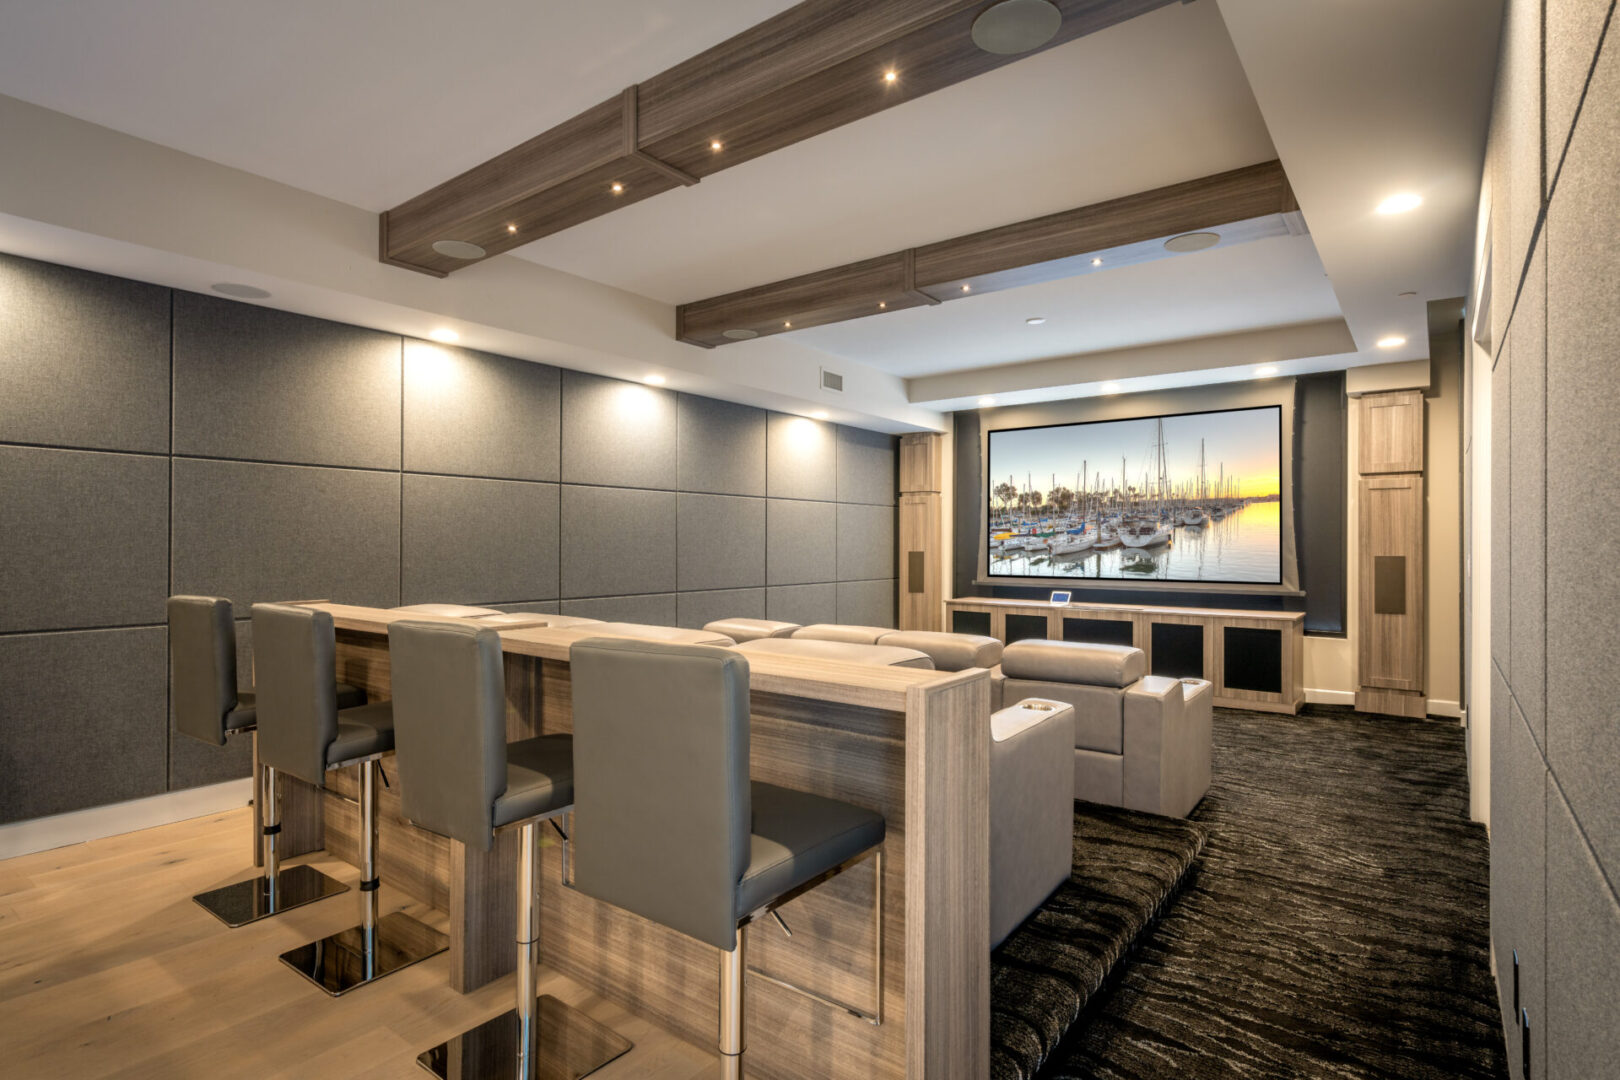 A home theater with reclining chairs and bar stools